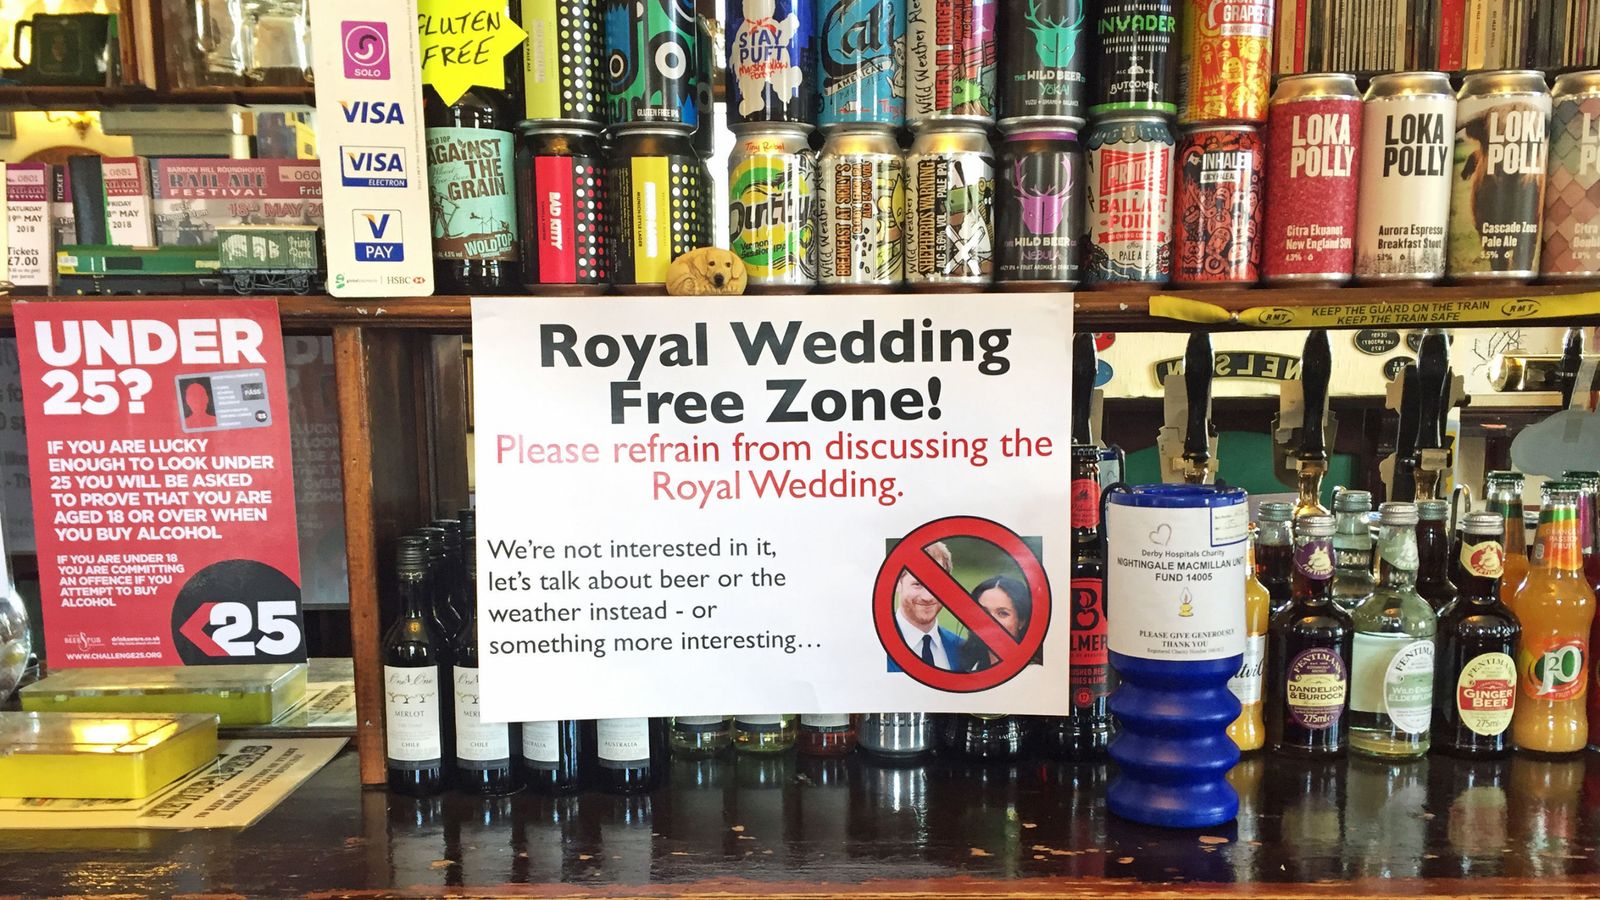 Pub to fine customers who mention the royal wedding on Saturday